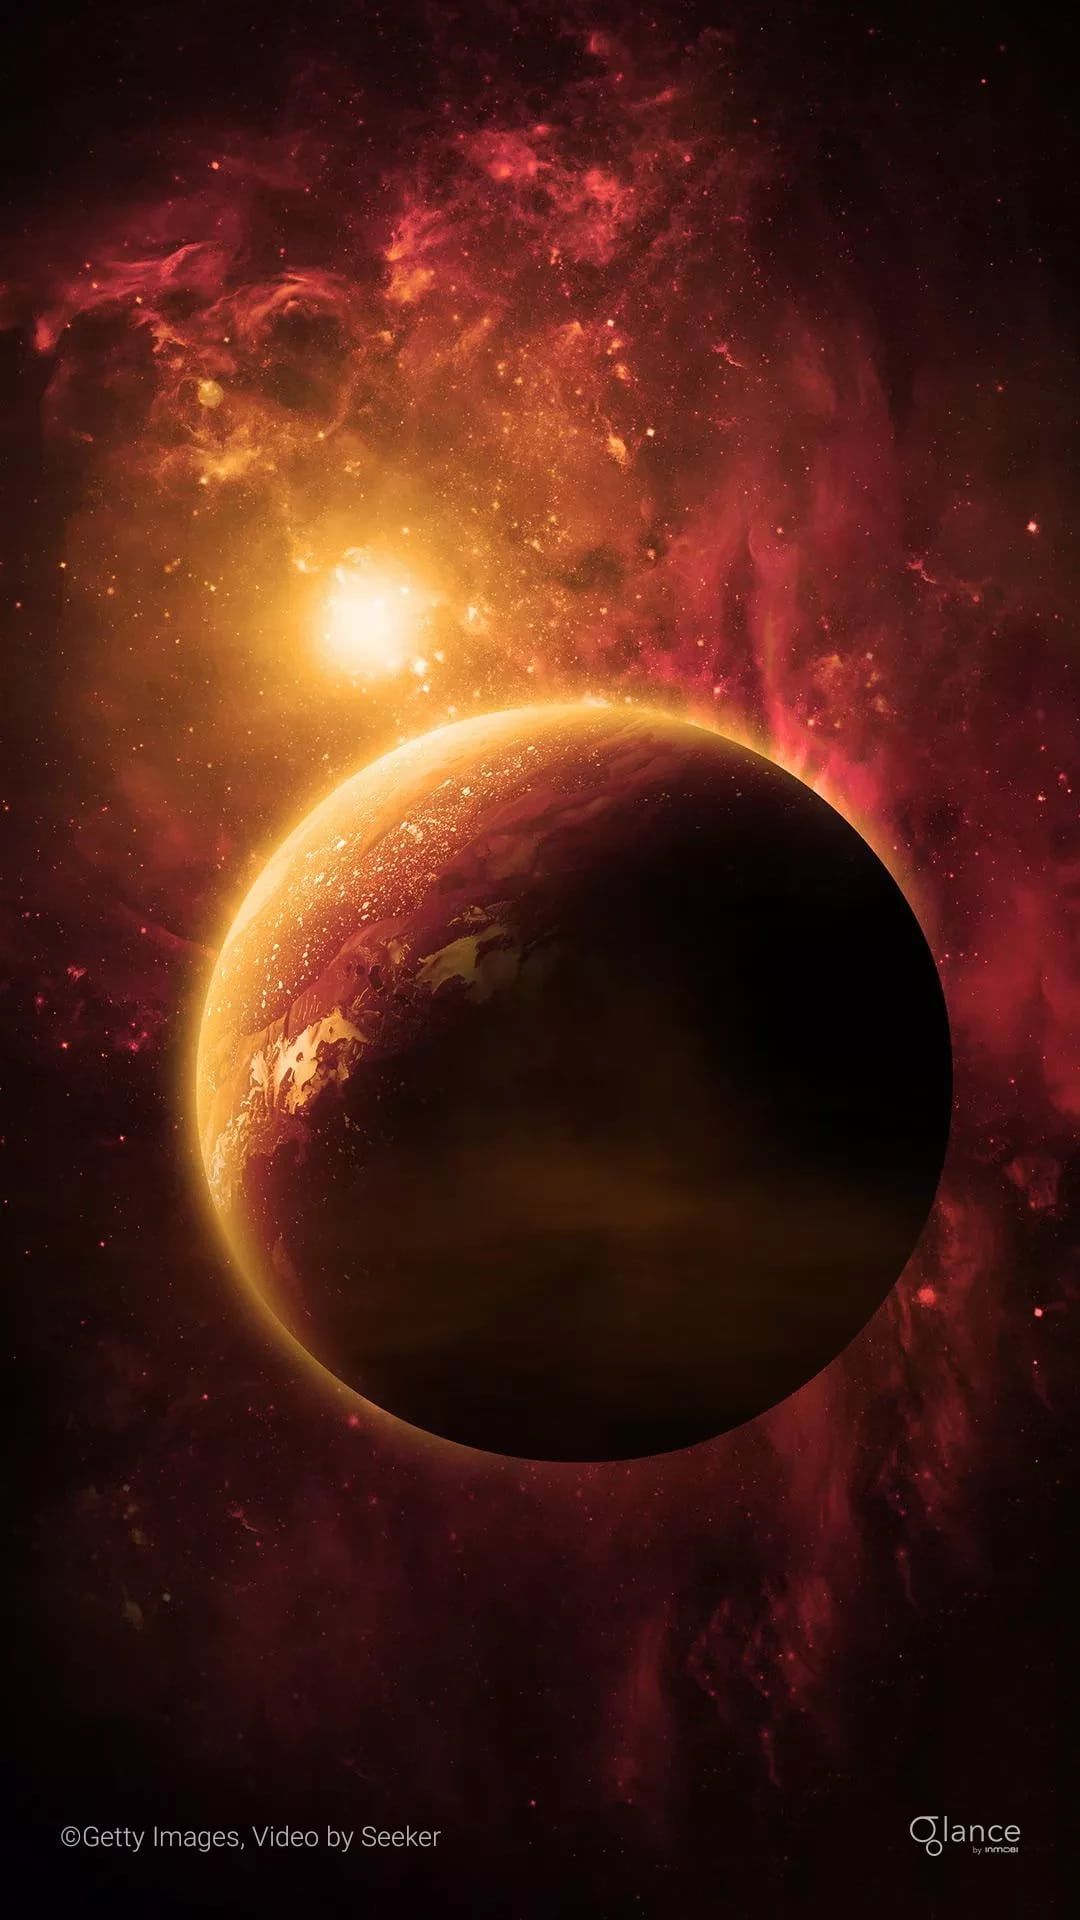 An artist's impression of a potentially habitable exoplanet orbiting a star in the Alpha Centauri system. - Mars